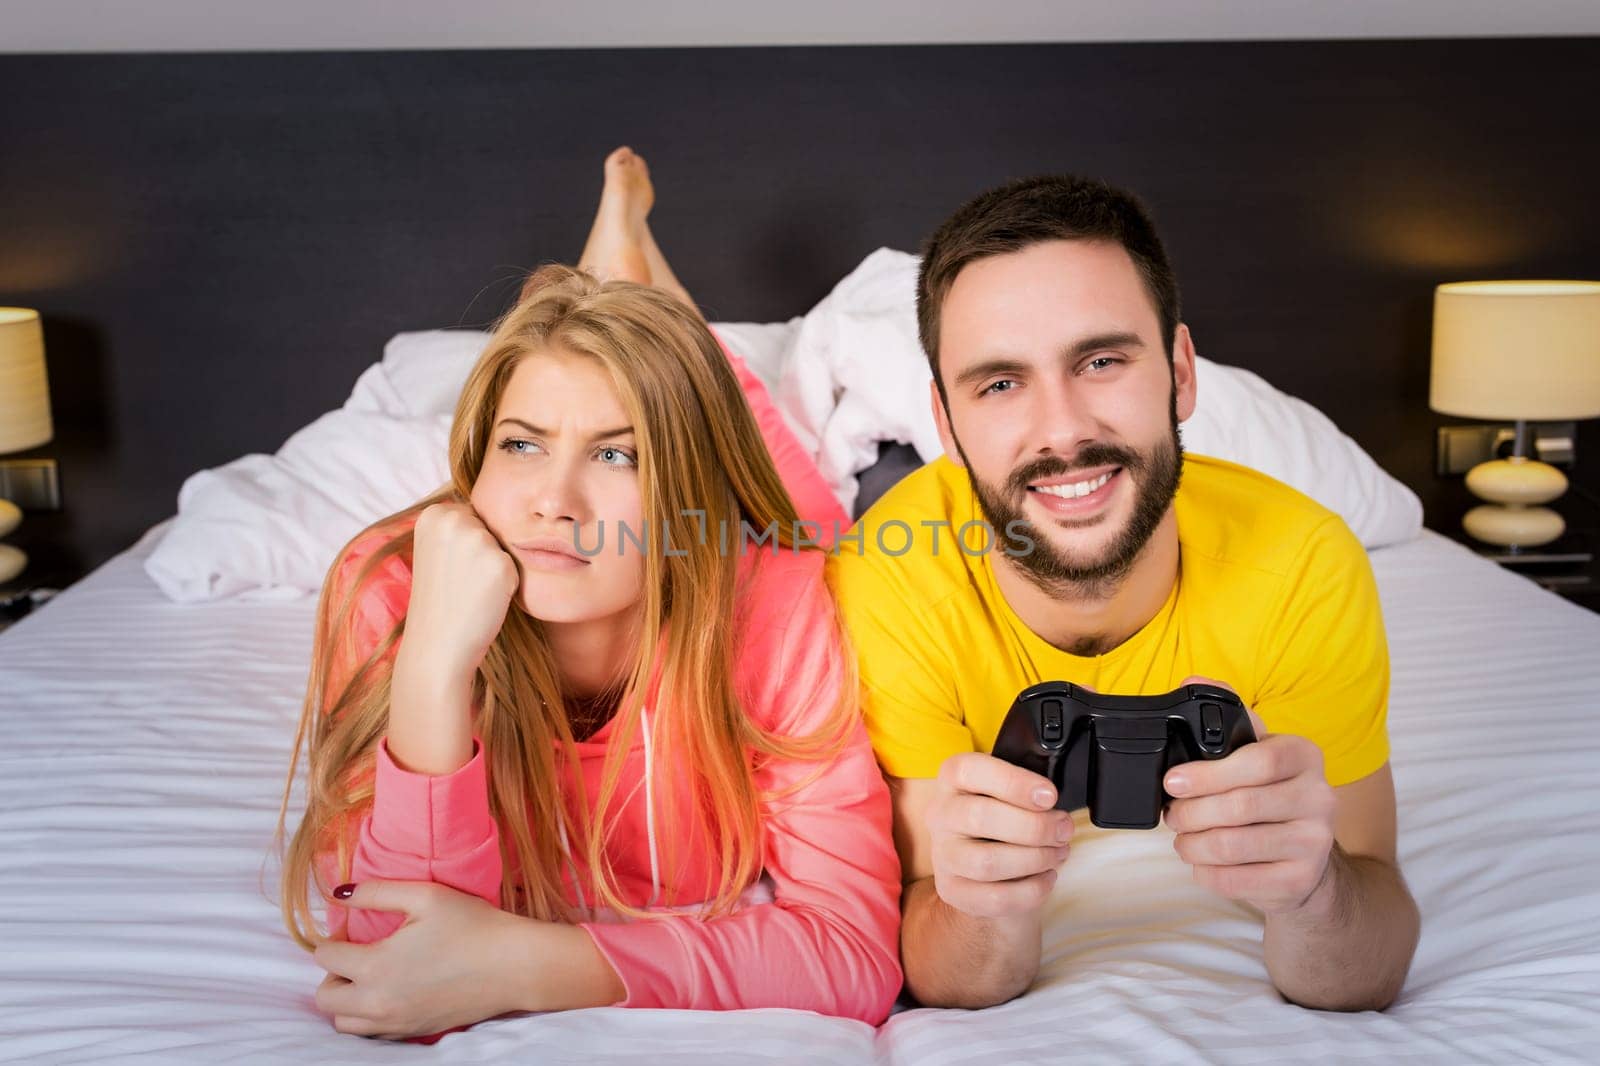 Young couple having playing videogames in bed. Man playing video game, woman upset.